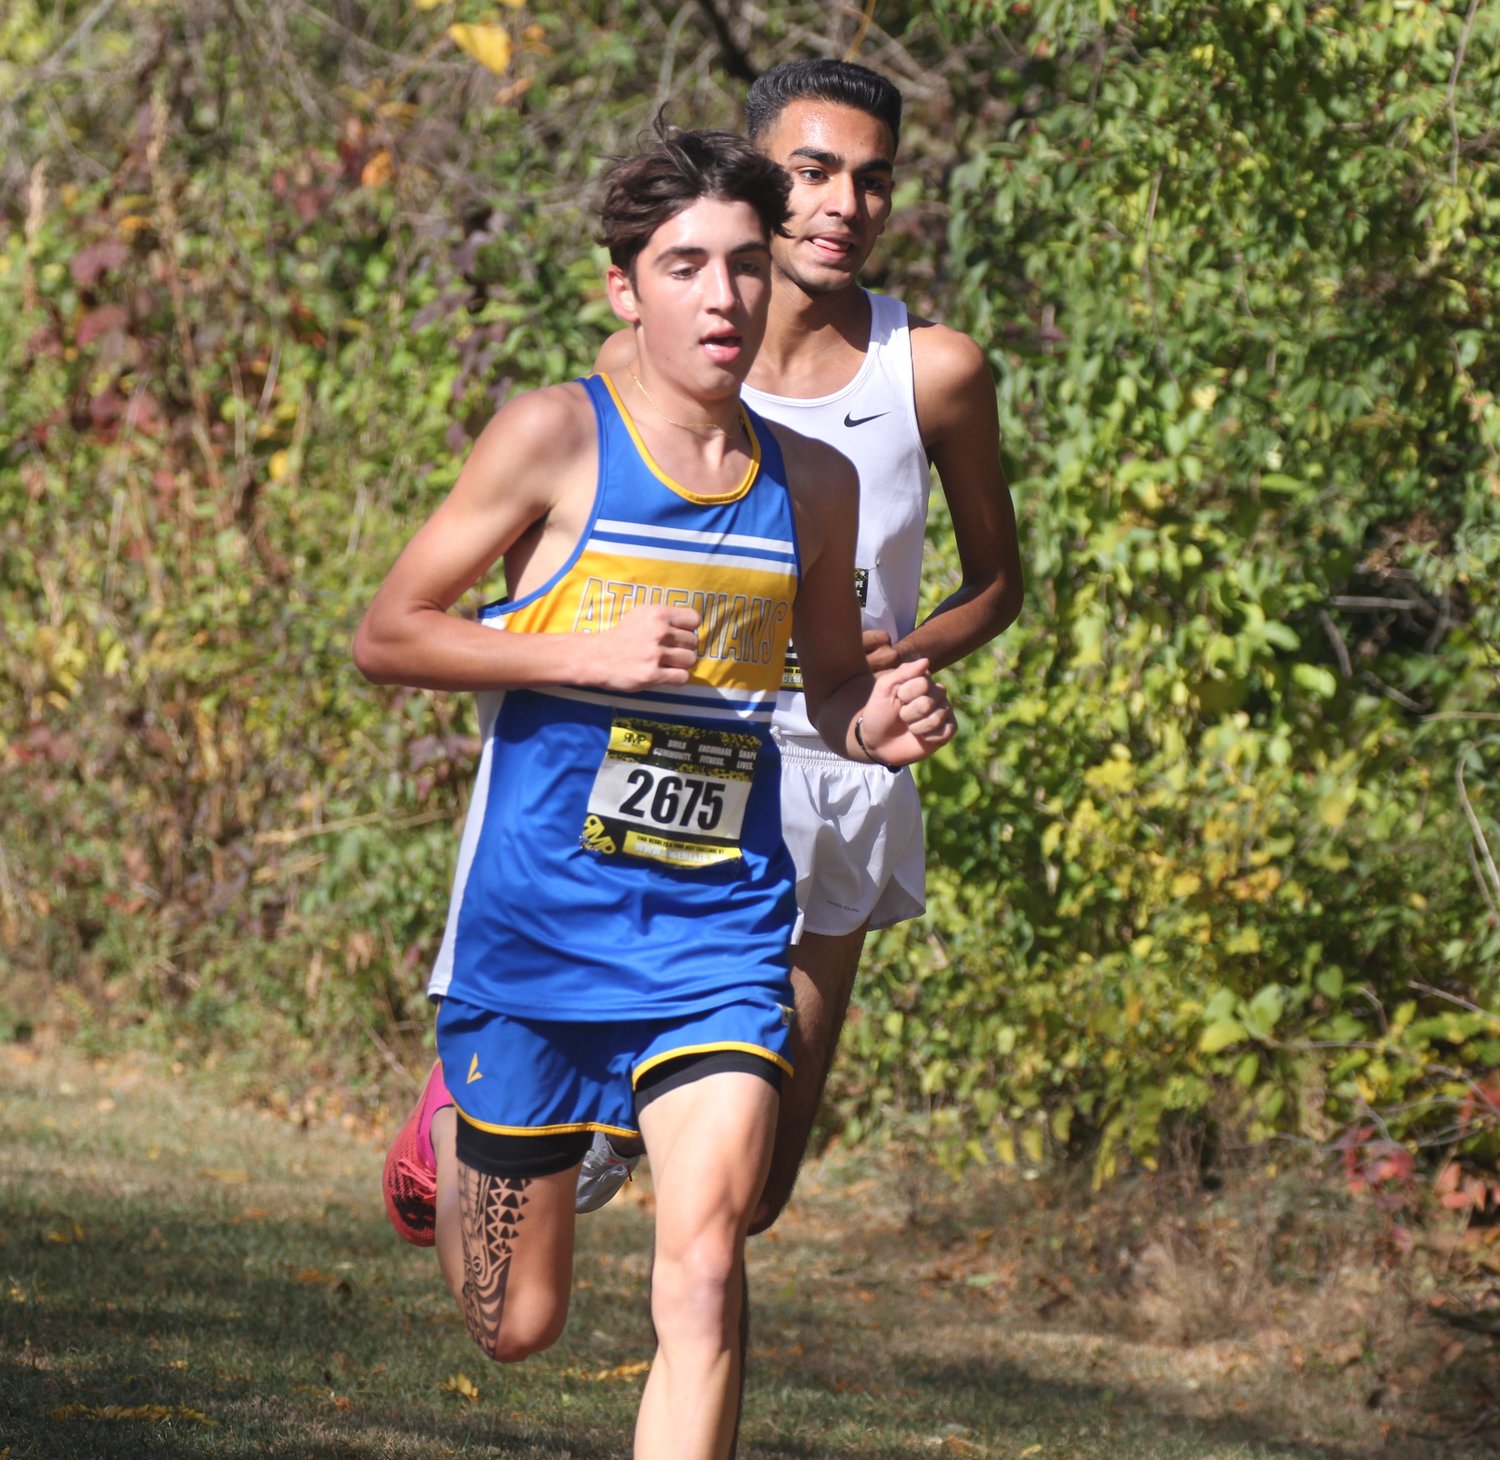 Ryan Miller is back at semi-state and will be looking for his 1st state finals appearance. The Crawfordsville junior broke the school record yet again at the Regional on Saturday.